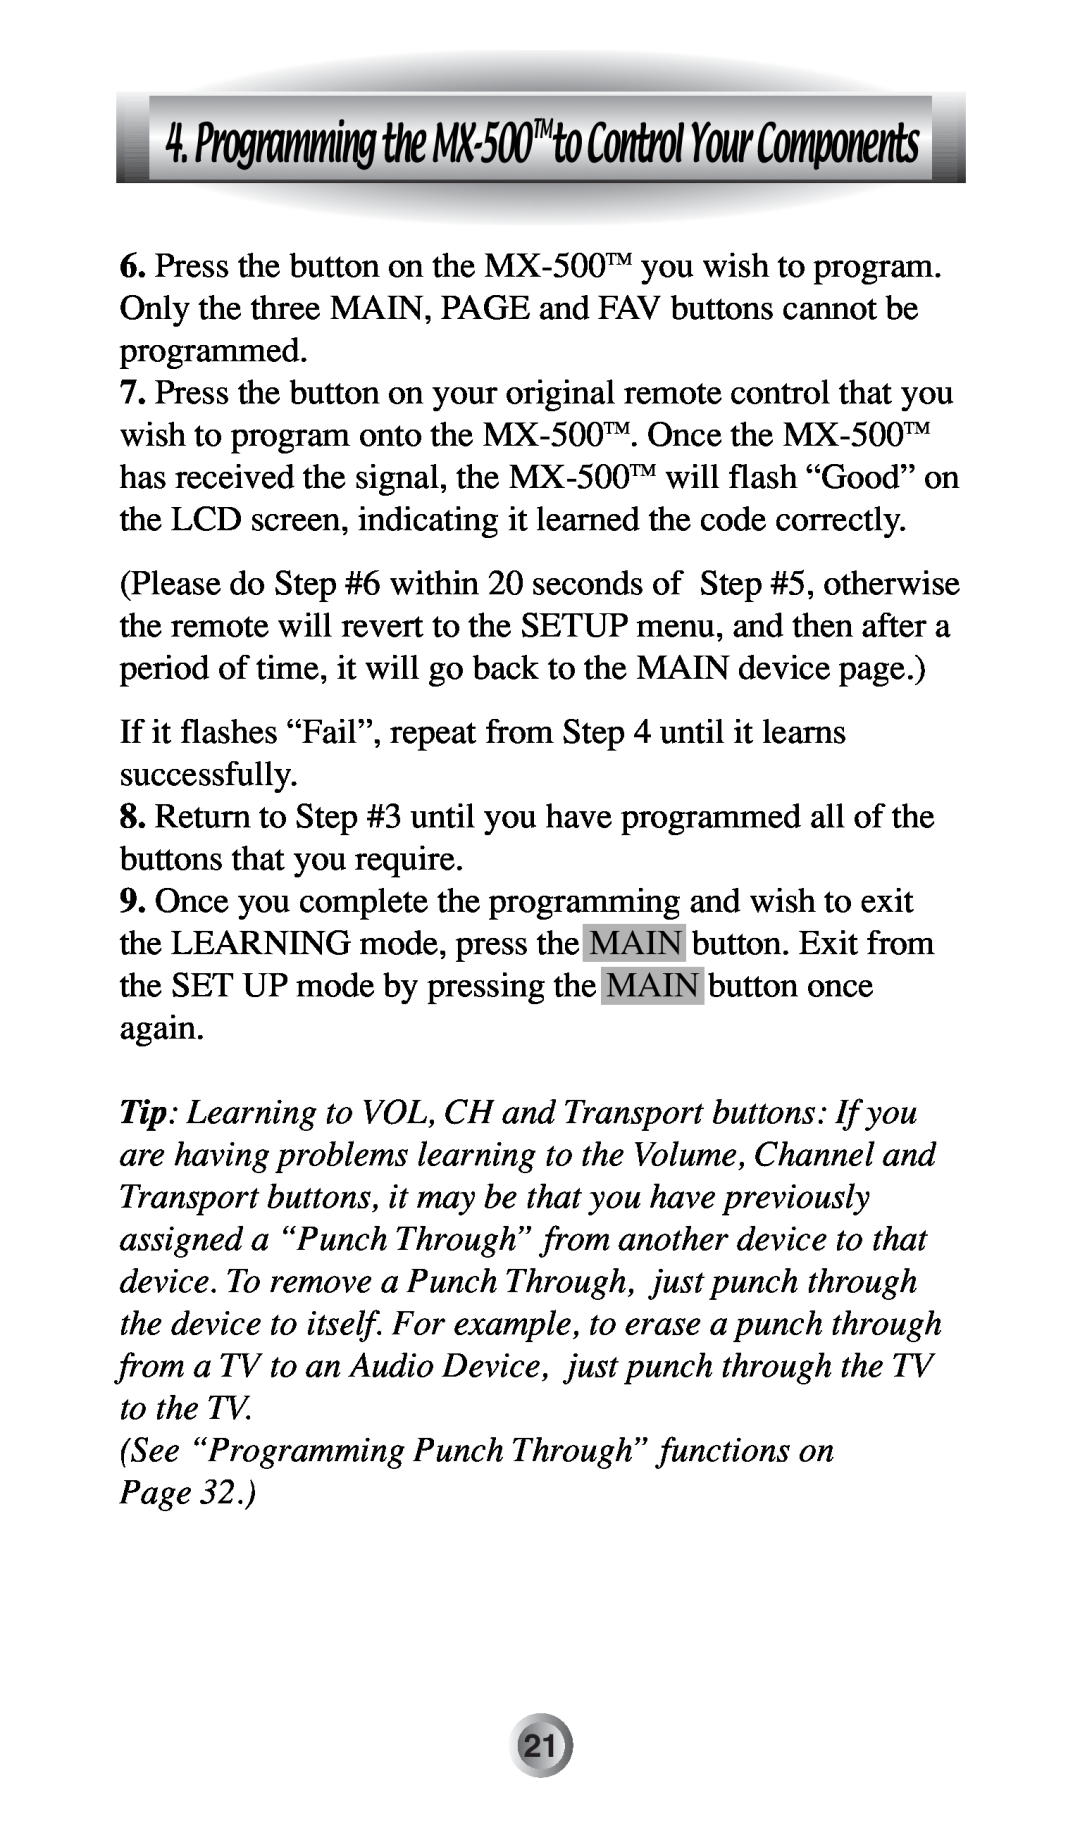 Radio Shack manual See “Programming Punch Through” functions on Page, ProgrammingtheMX-500TMtoControlYourComponents 